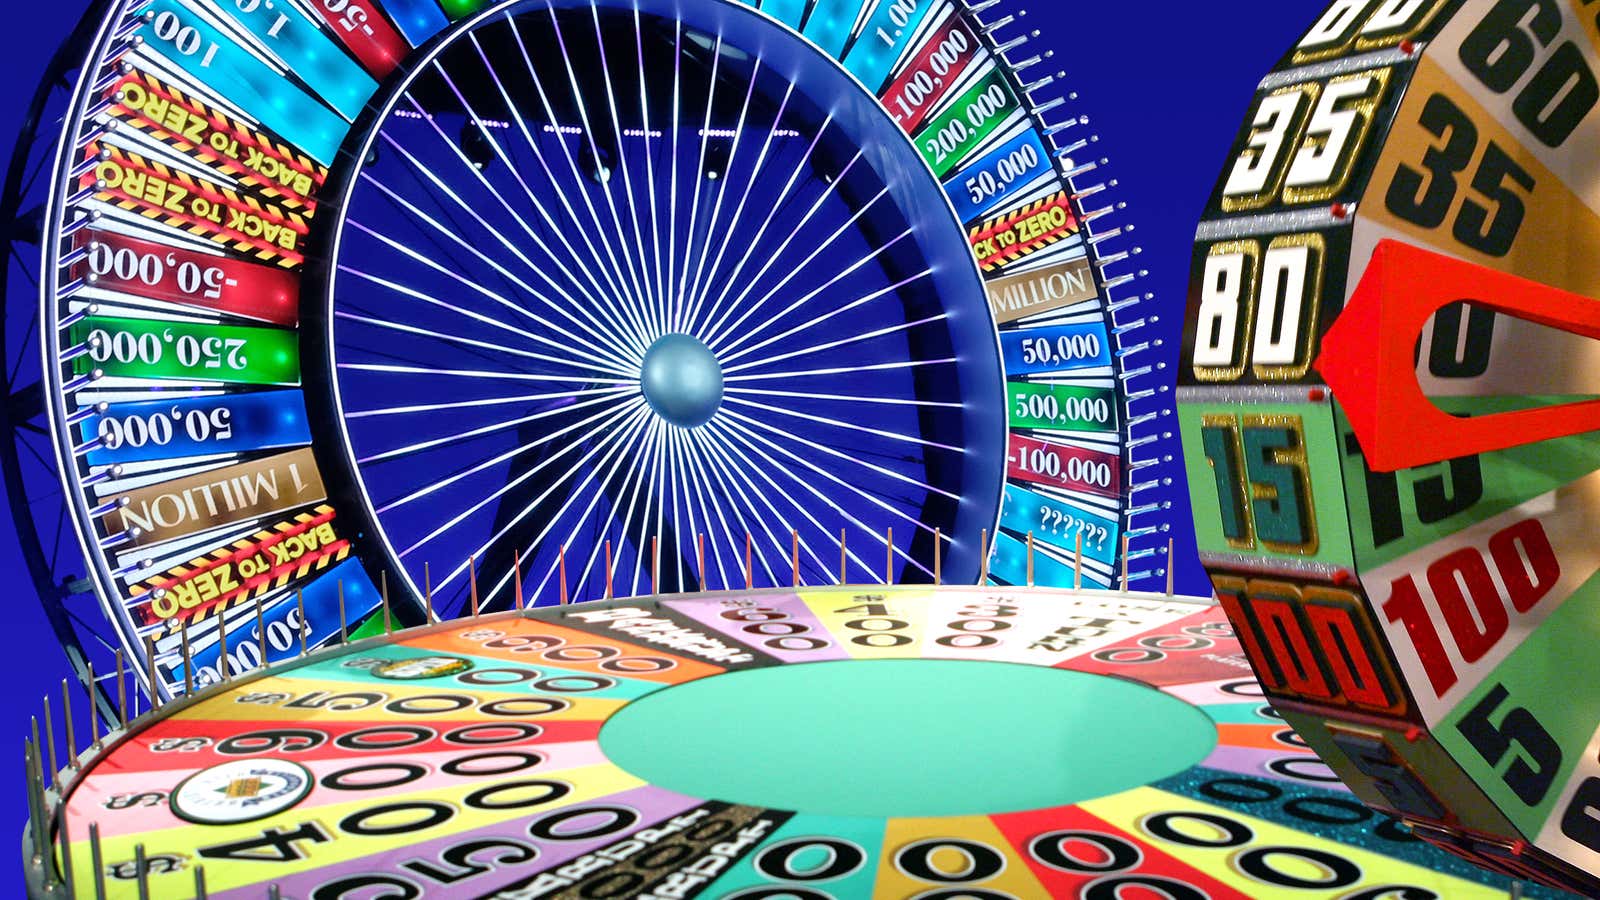 Graphic: Natalie Peeples, Photos: Spin The Wheel (Ray Mickshaw/Fox), Wheel Of Fortune (Doug Benc/Getty Images), The Price Is Right (Valerie Macon/Stringer/Getty Images)